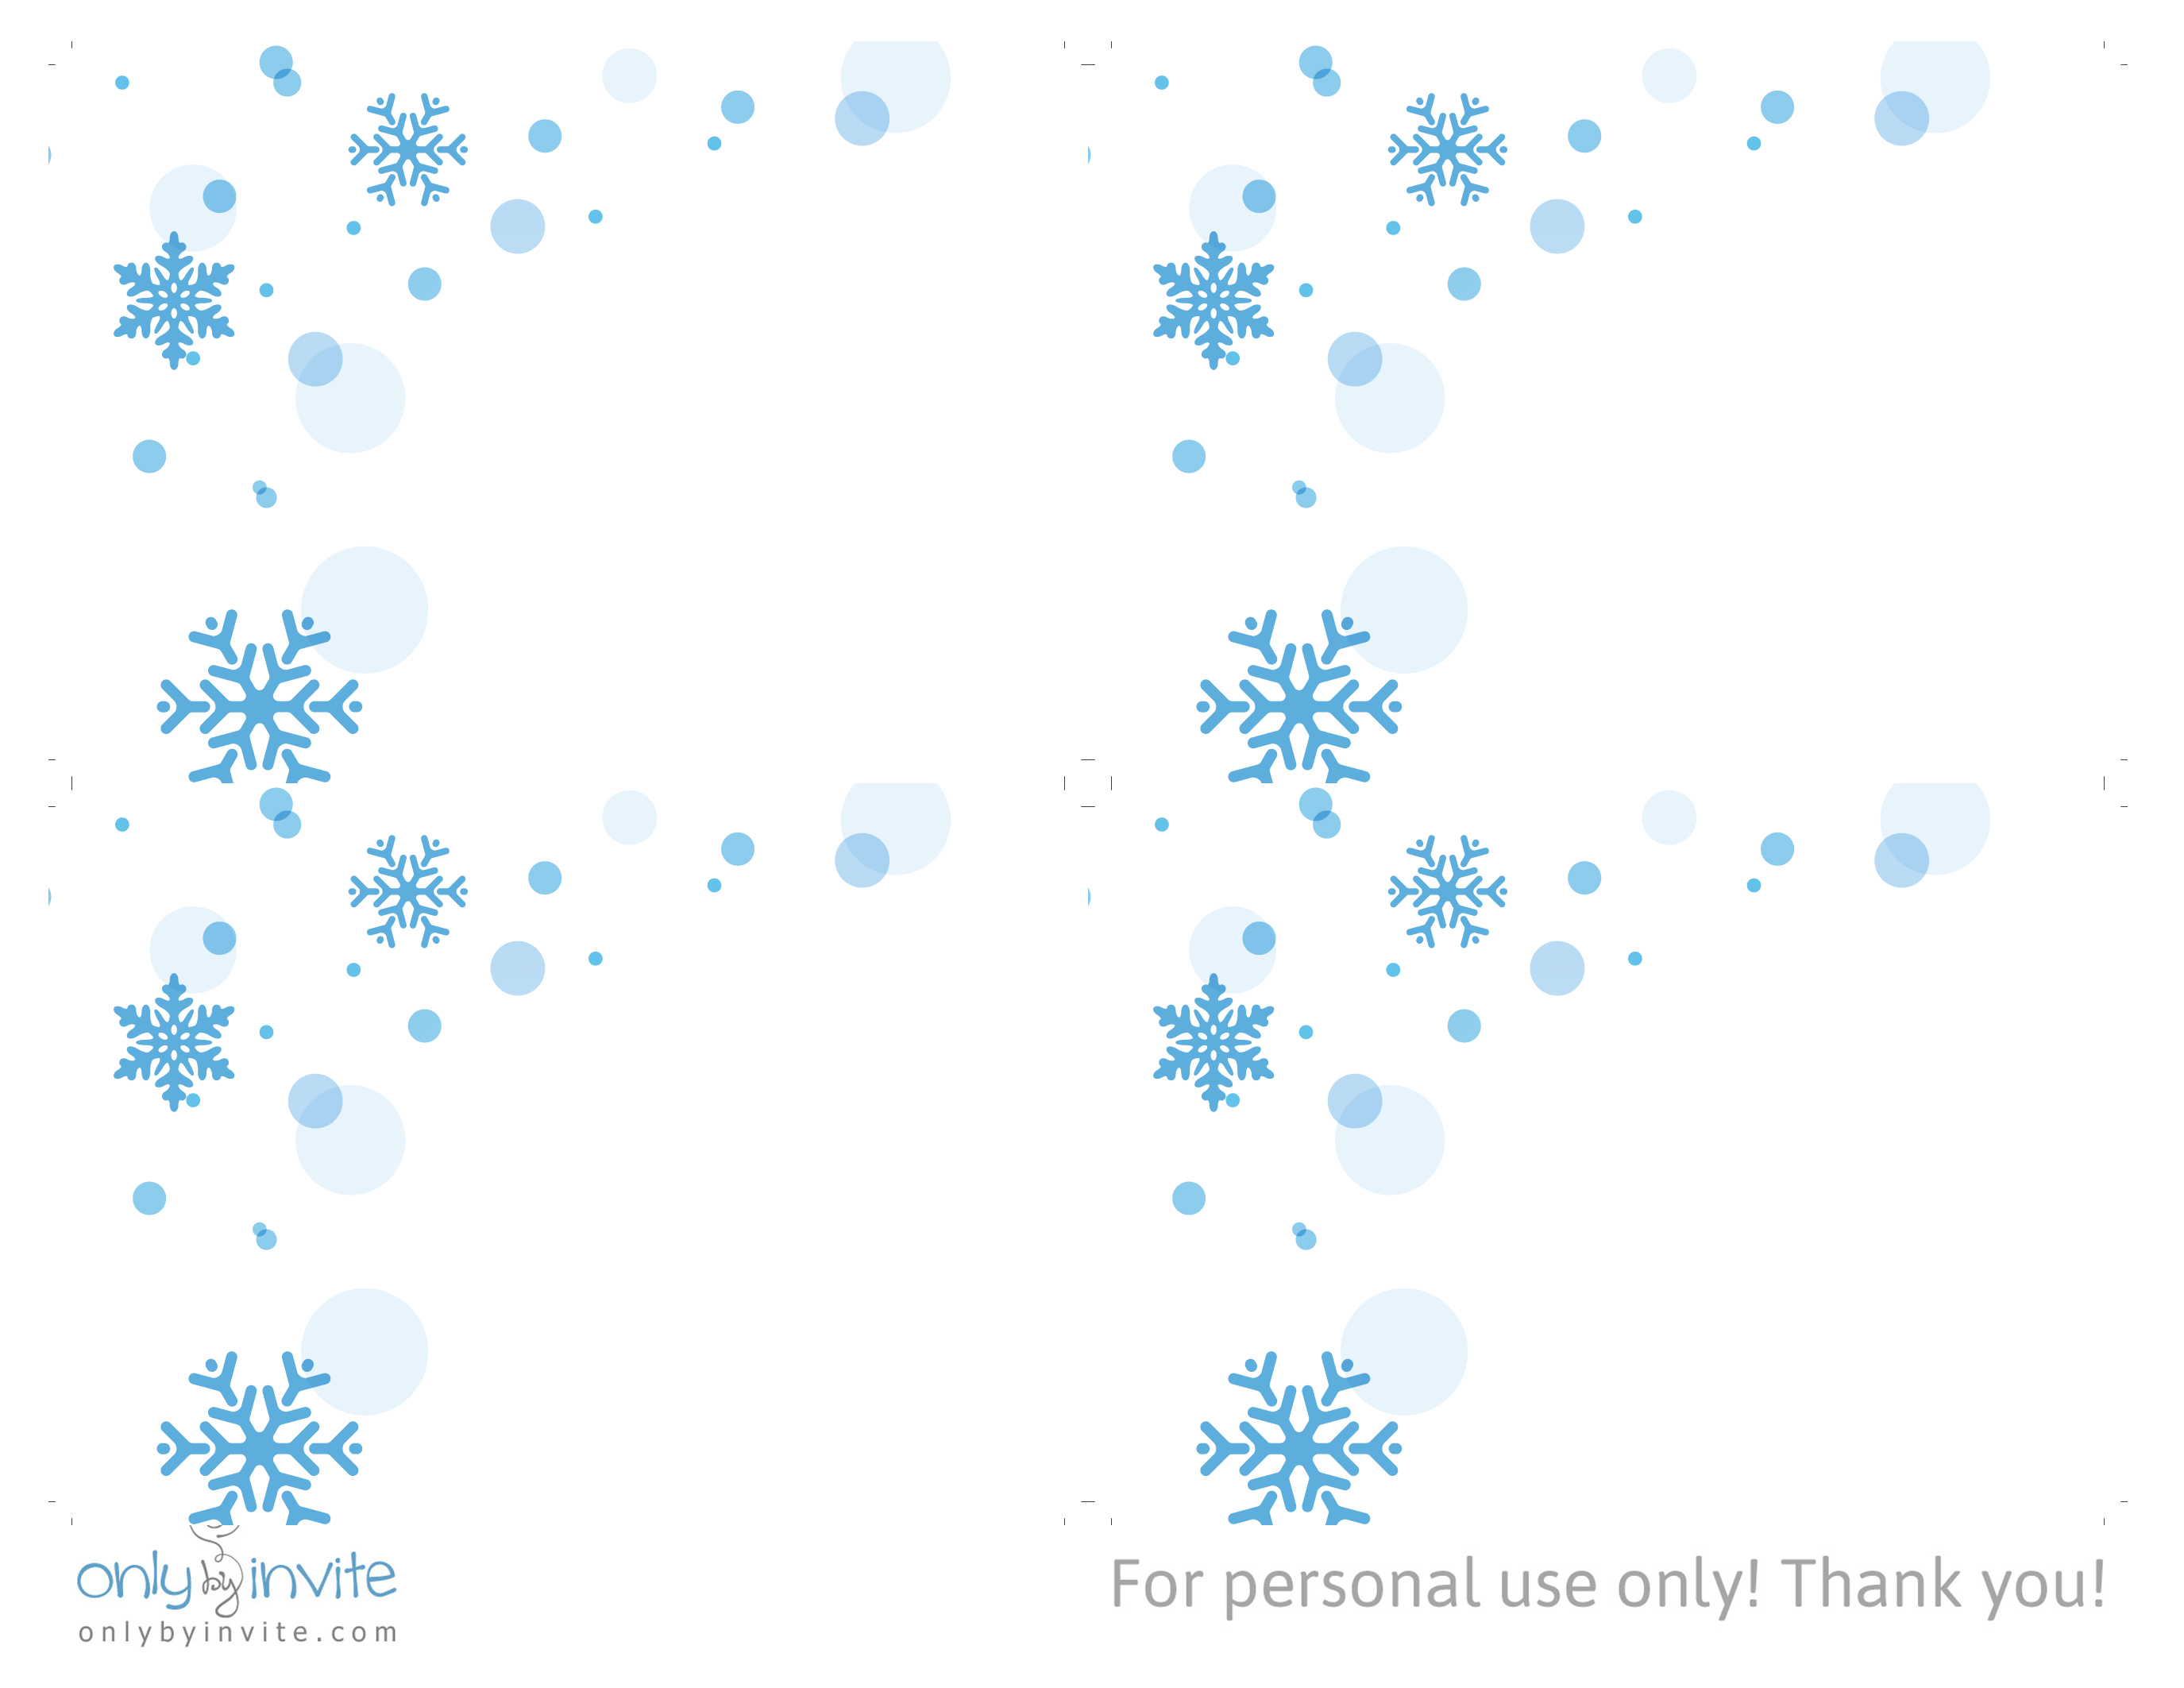 7-best-images-of-winter-printable-templates-free-printable-mitten